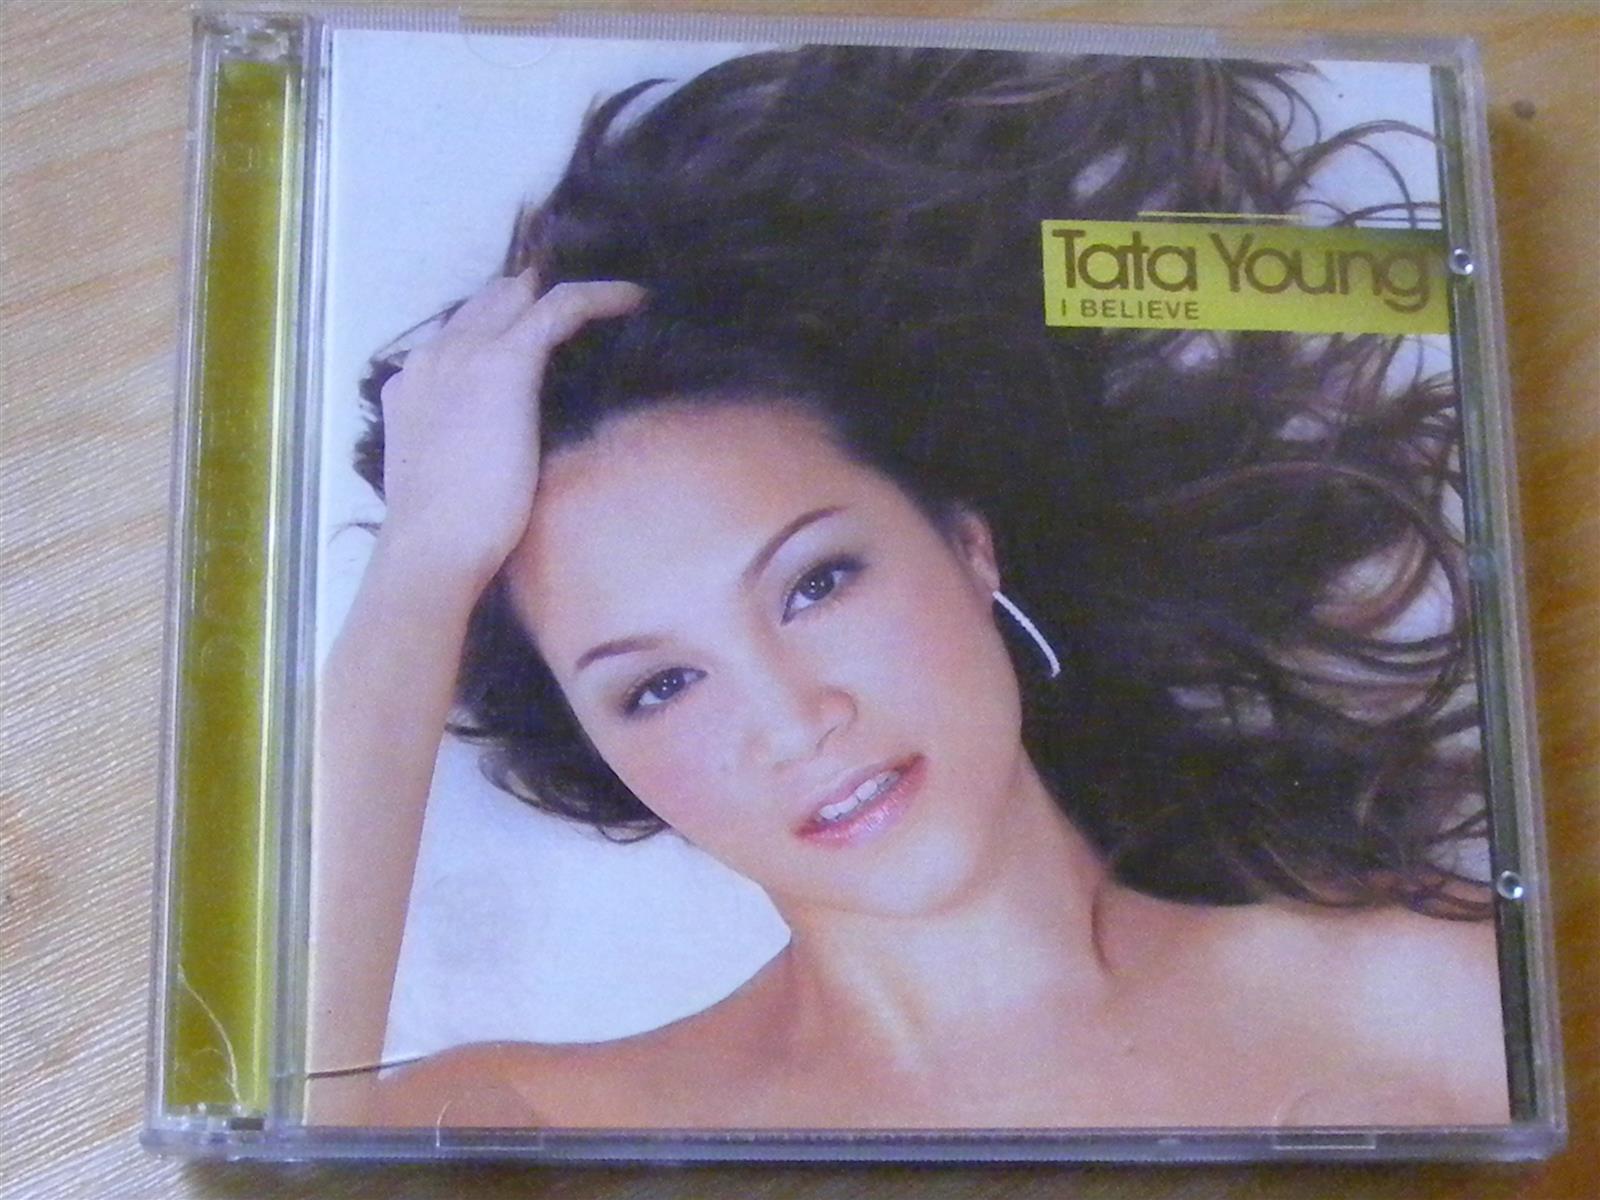 Tata Young I Believe [Thank You Edition] (2005)